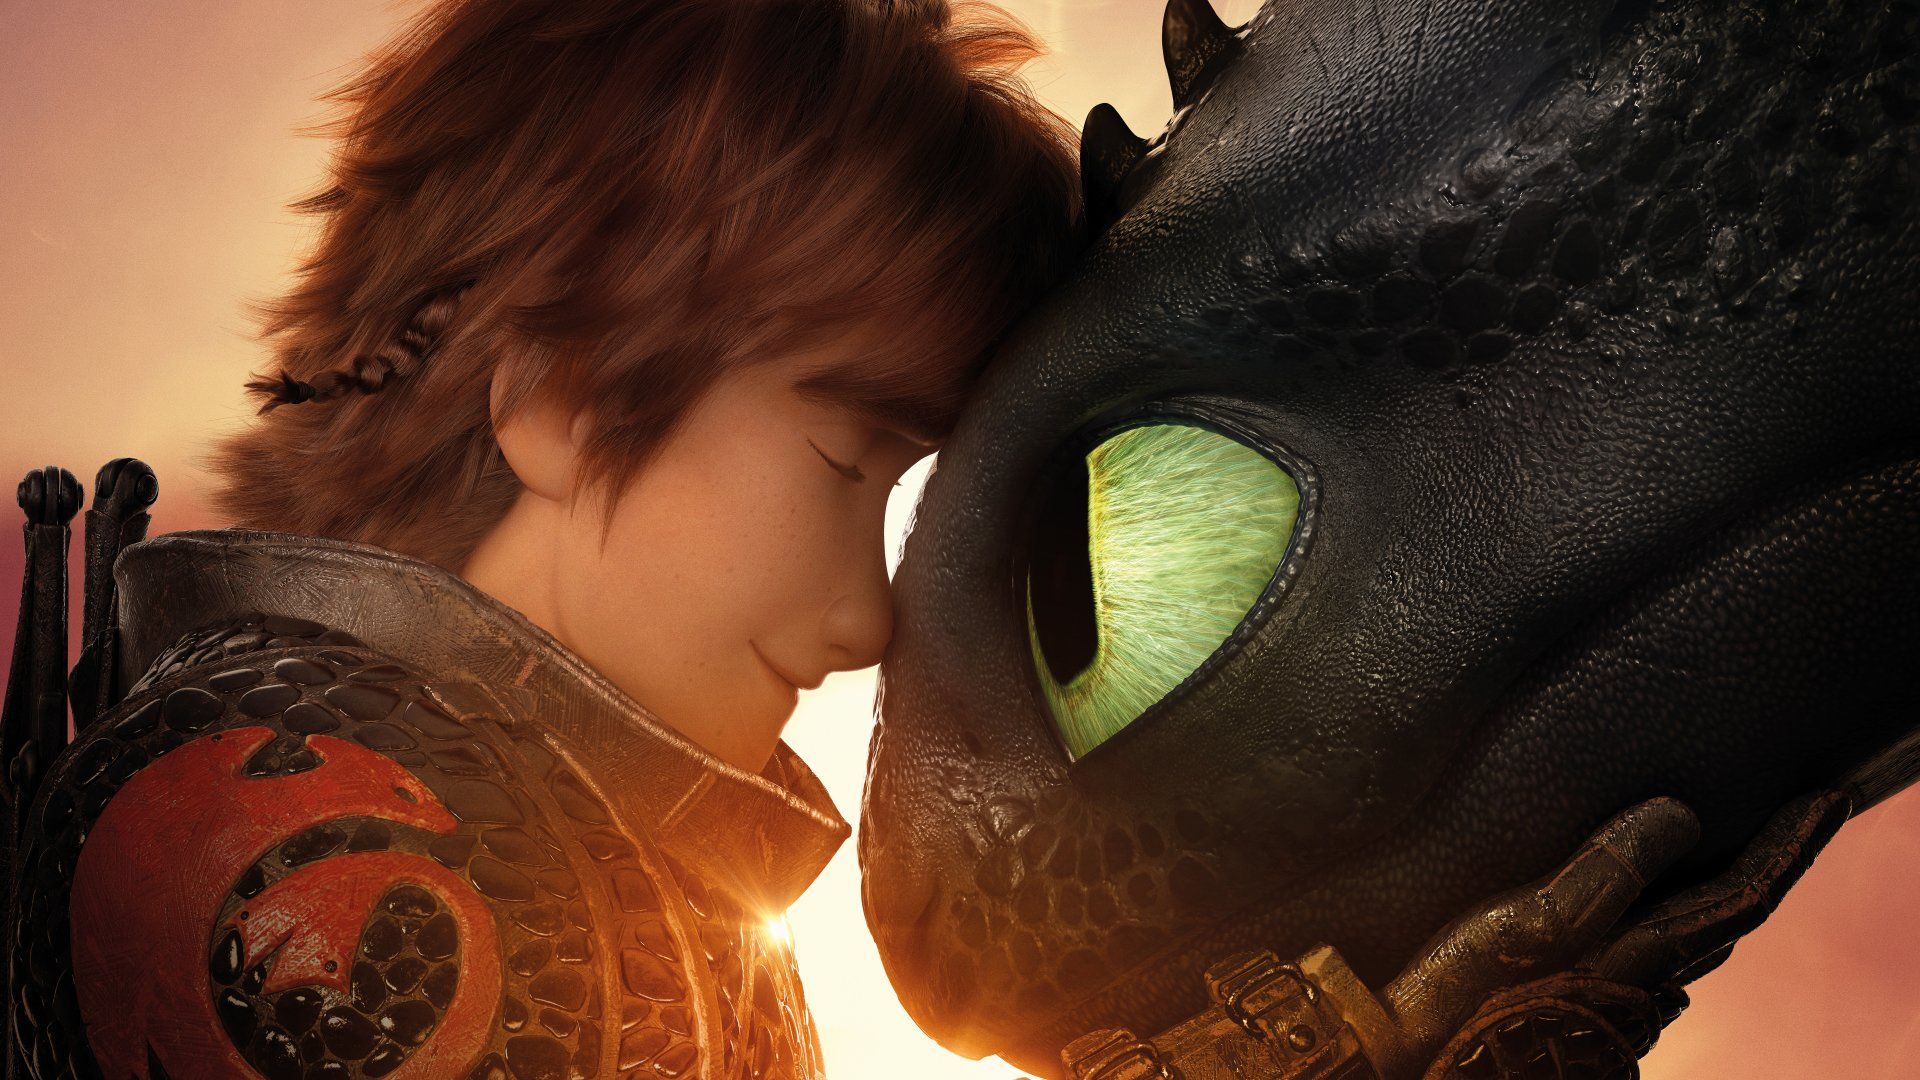 Cool How To Train Your Dragon Background Image and Wallpaper